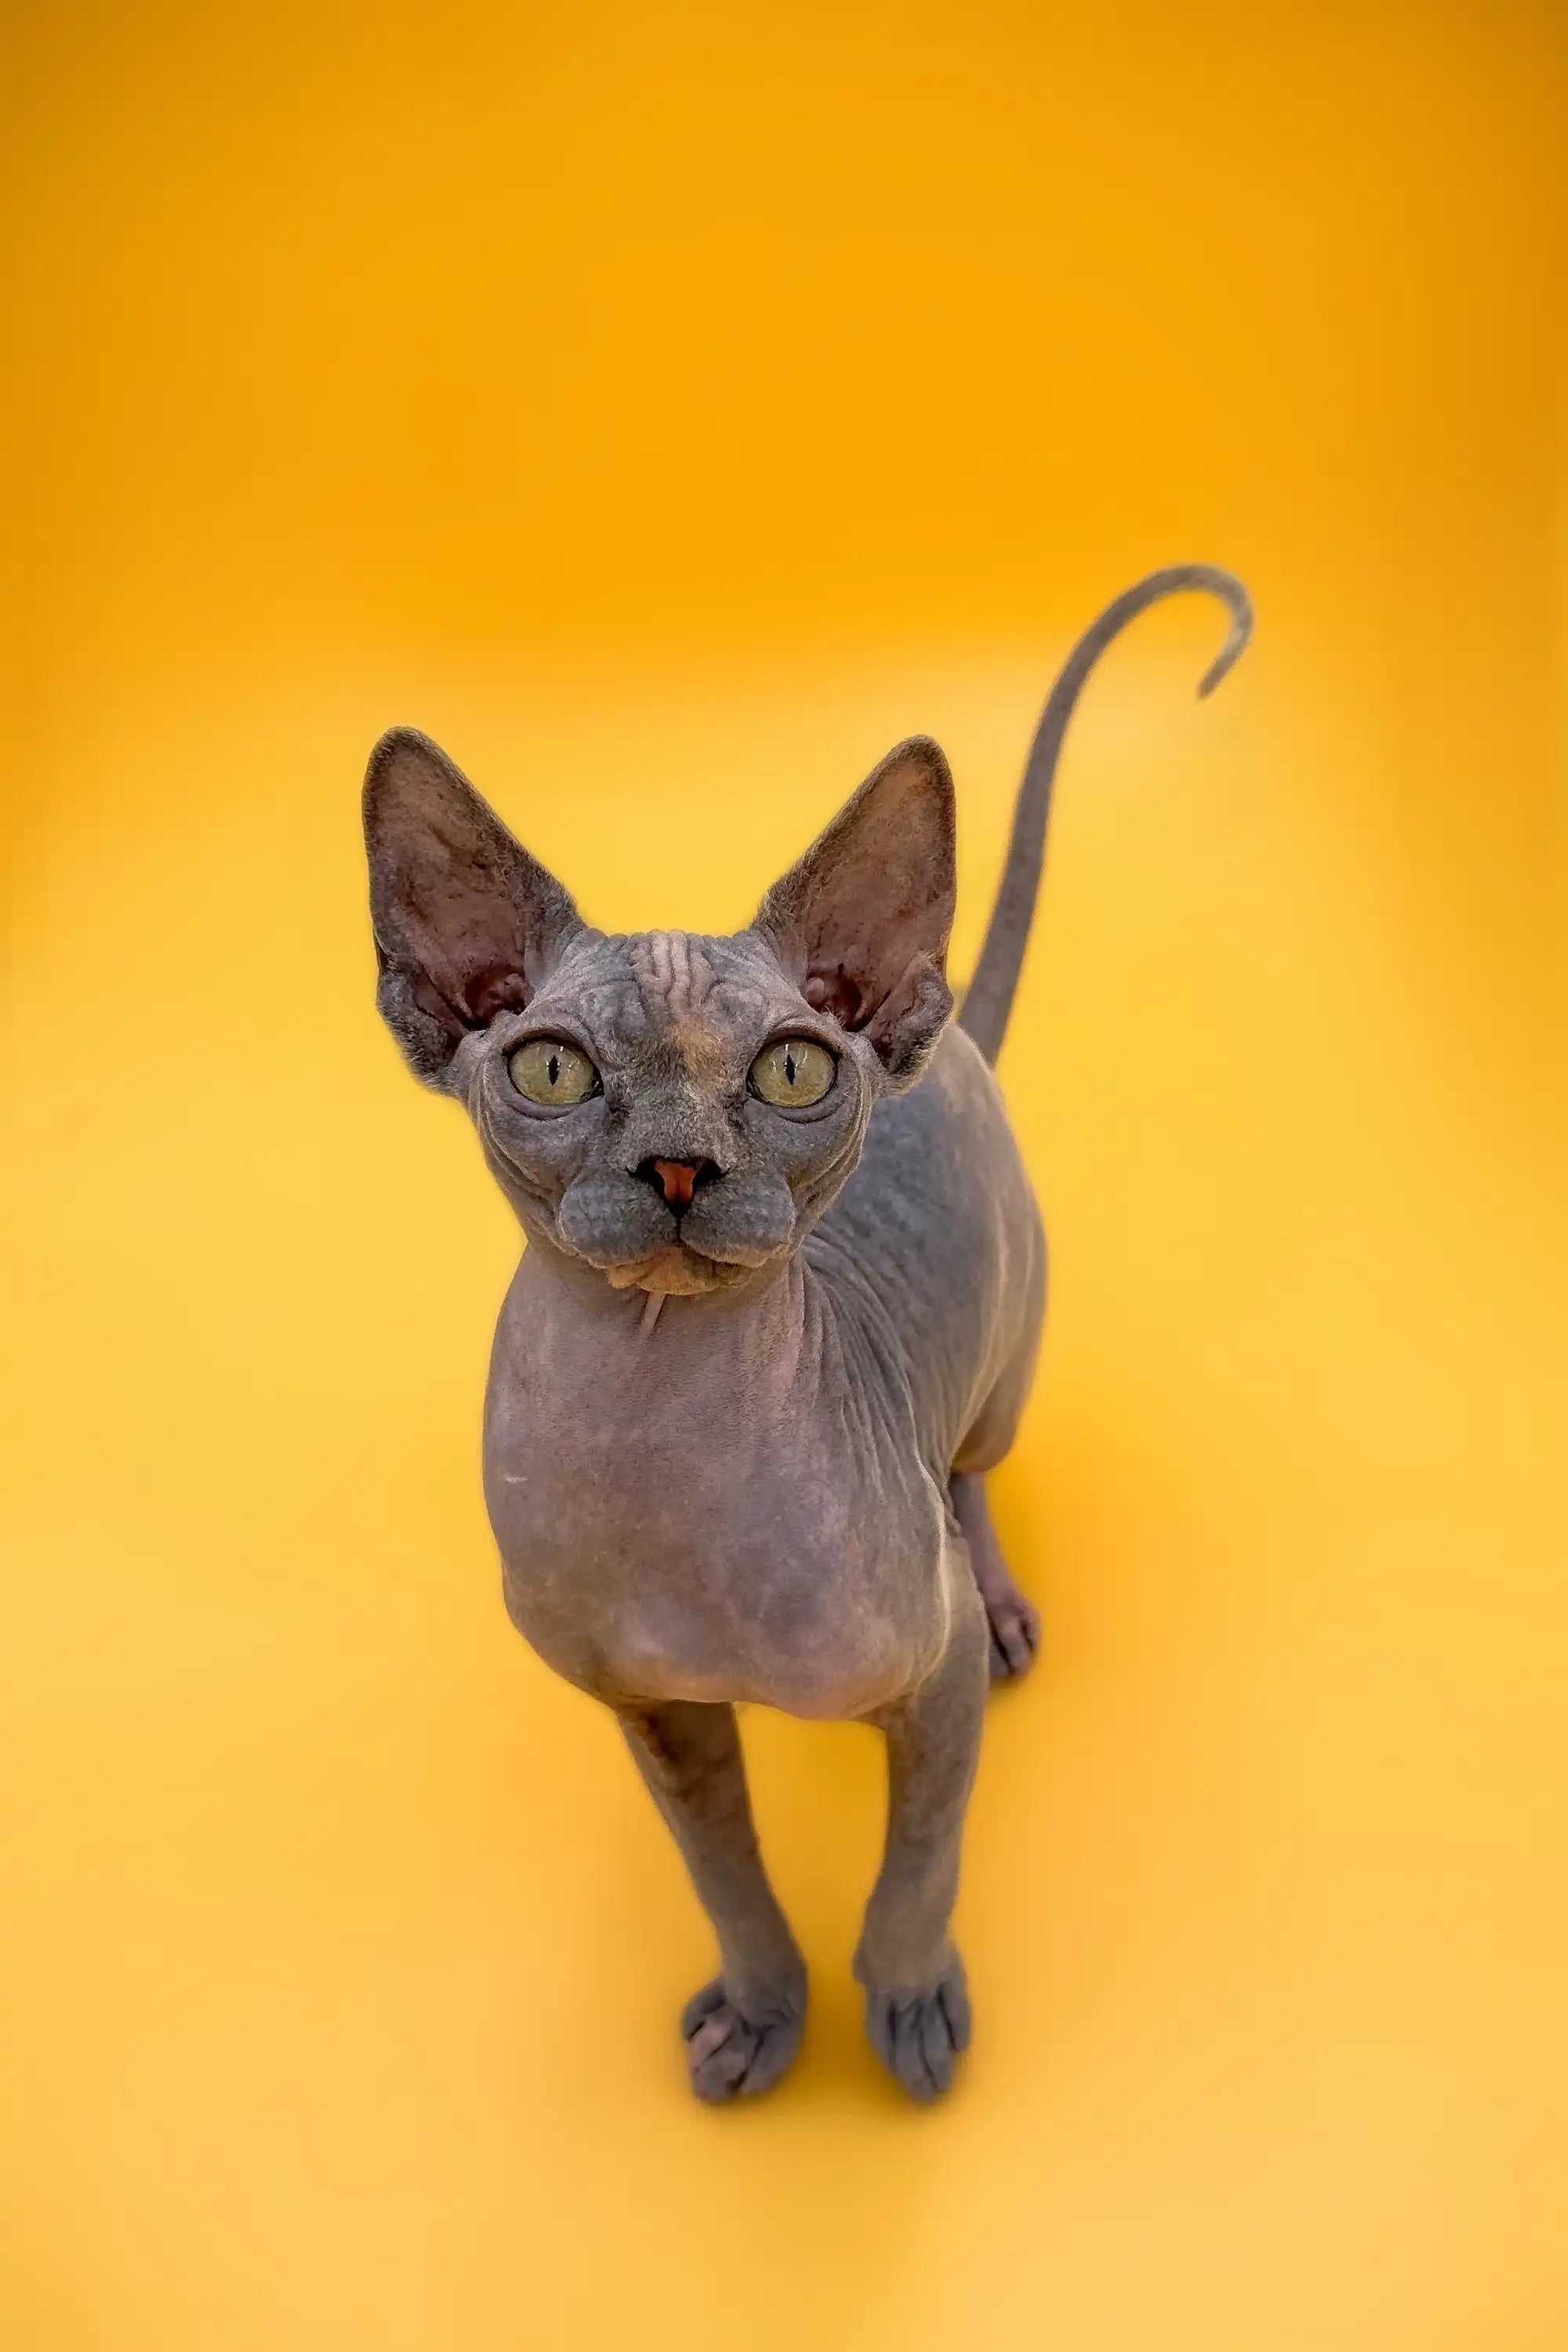 Sphynx Cats and Kittens for Sale Mirand | Kitten